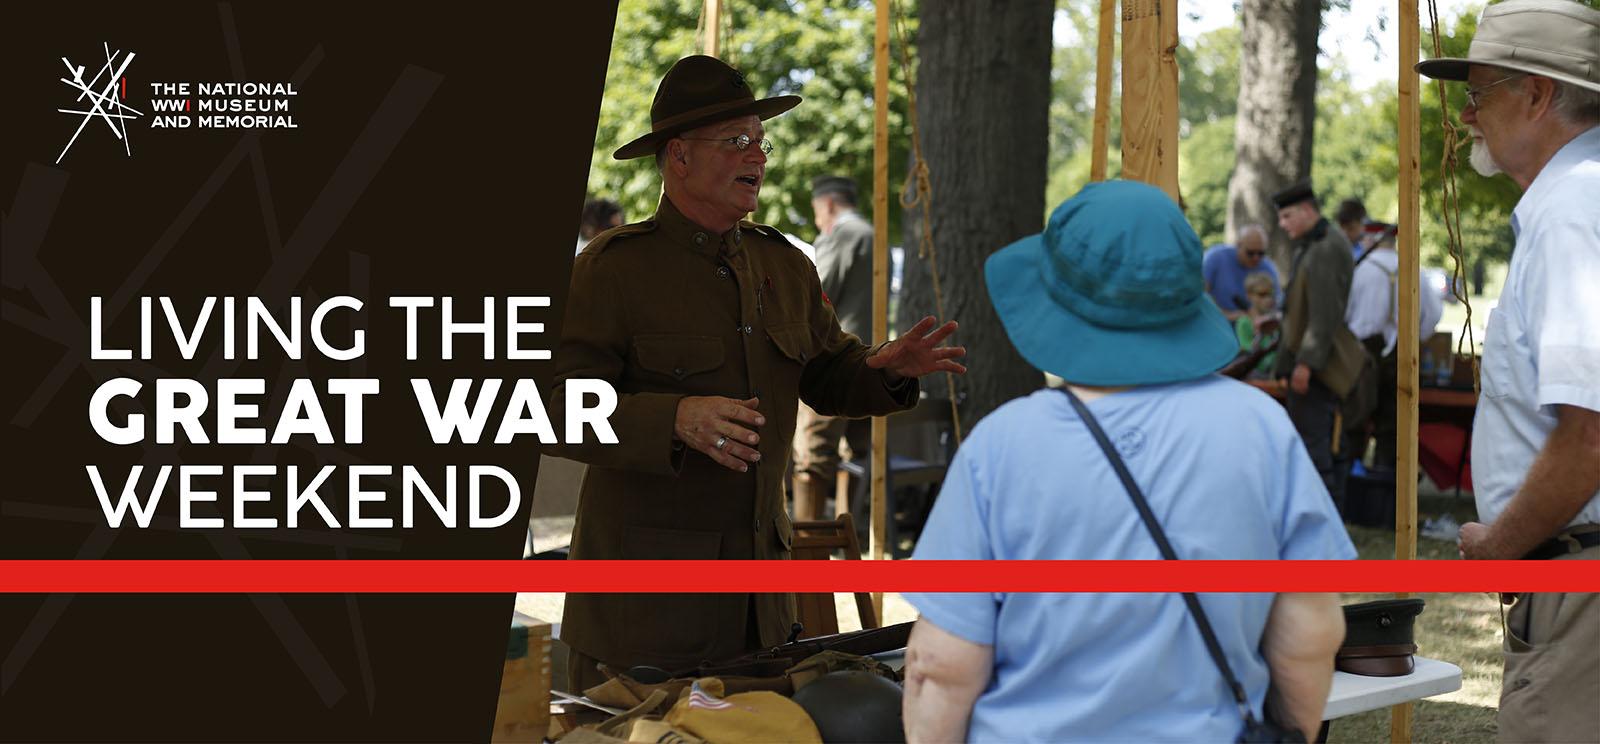 Image: Modern photograph of a man dressed in WWI uniform standing under a WWI tent structure, speaking animatedly to a person wearing modern-day clothes. Text: 'Living the Great War Weekend'